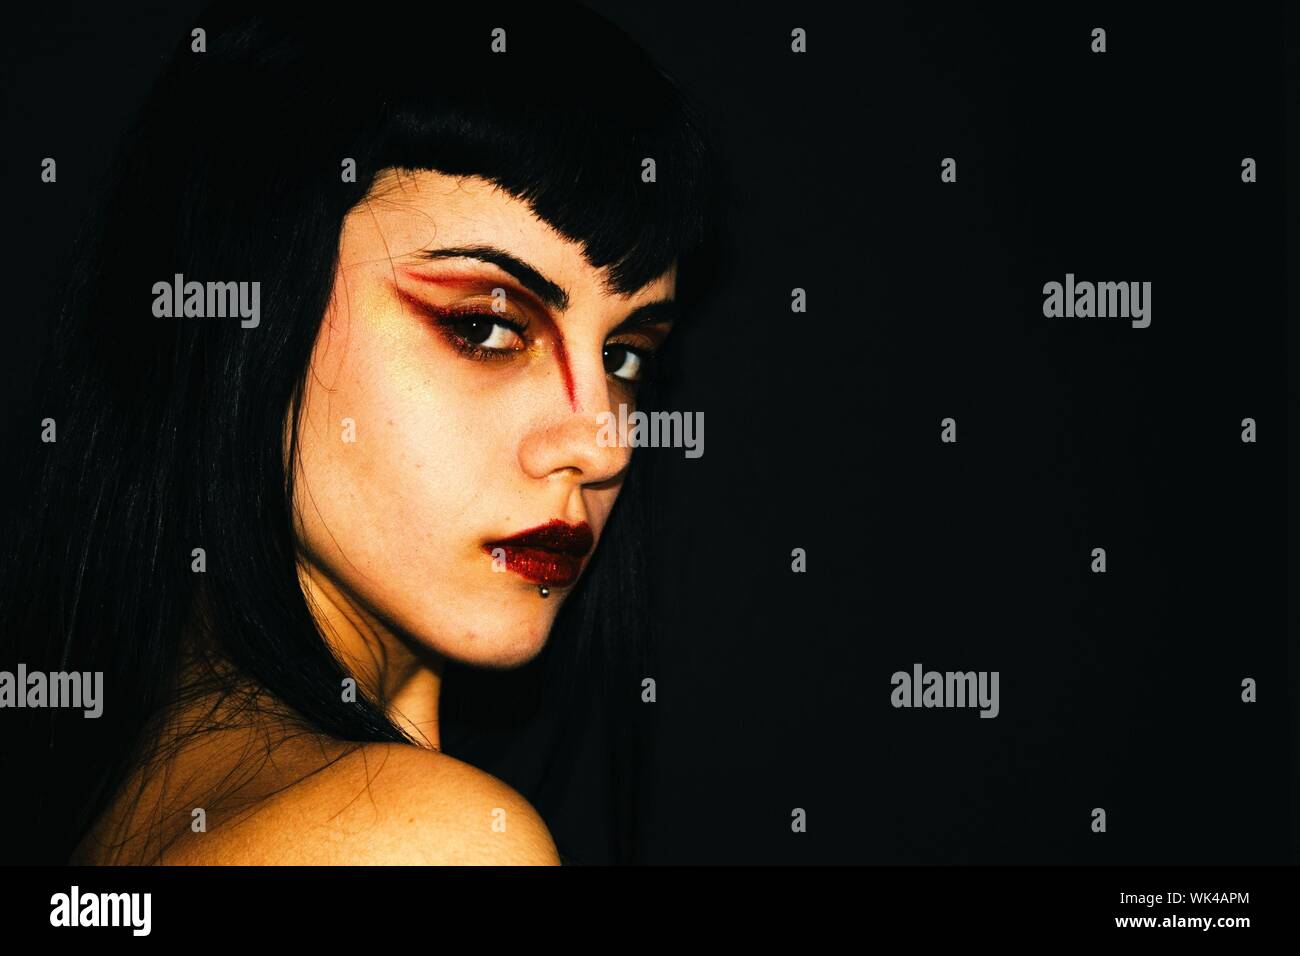 Side View Portrait Of Serious Young Woman With Eyeshadow Against Black Background Stock Photo